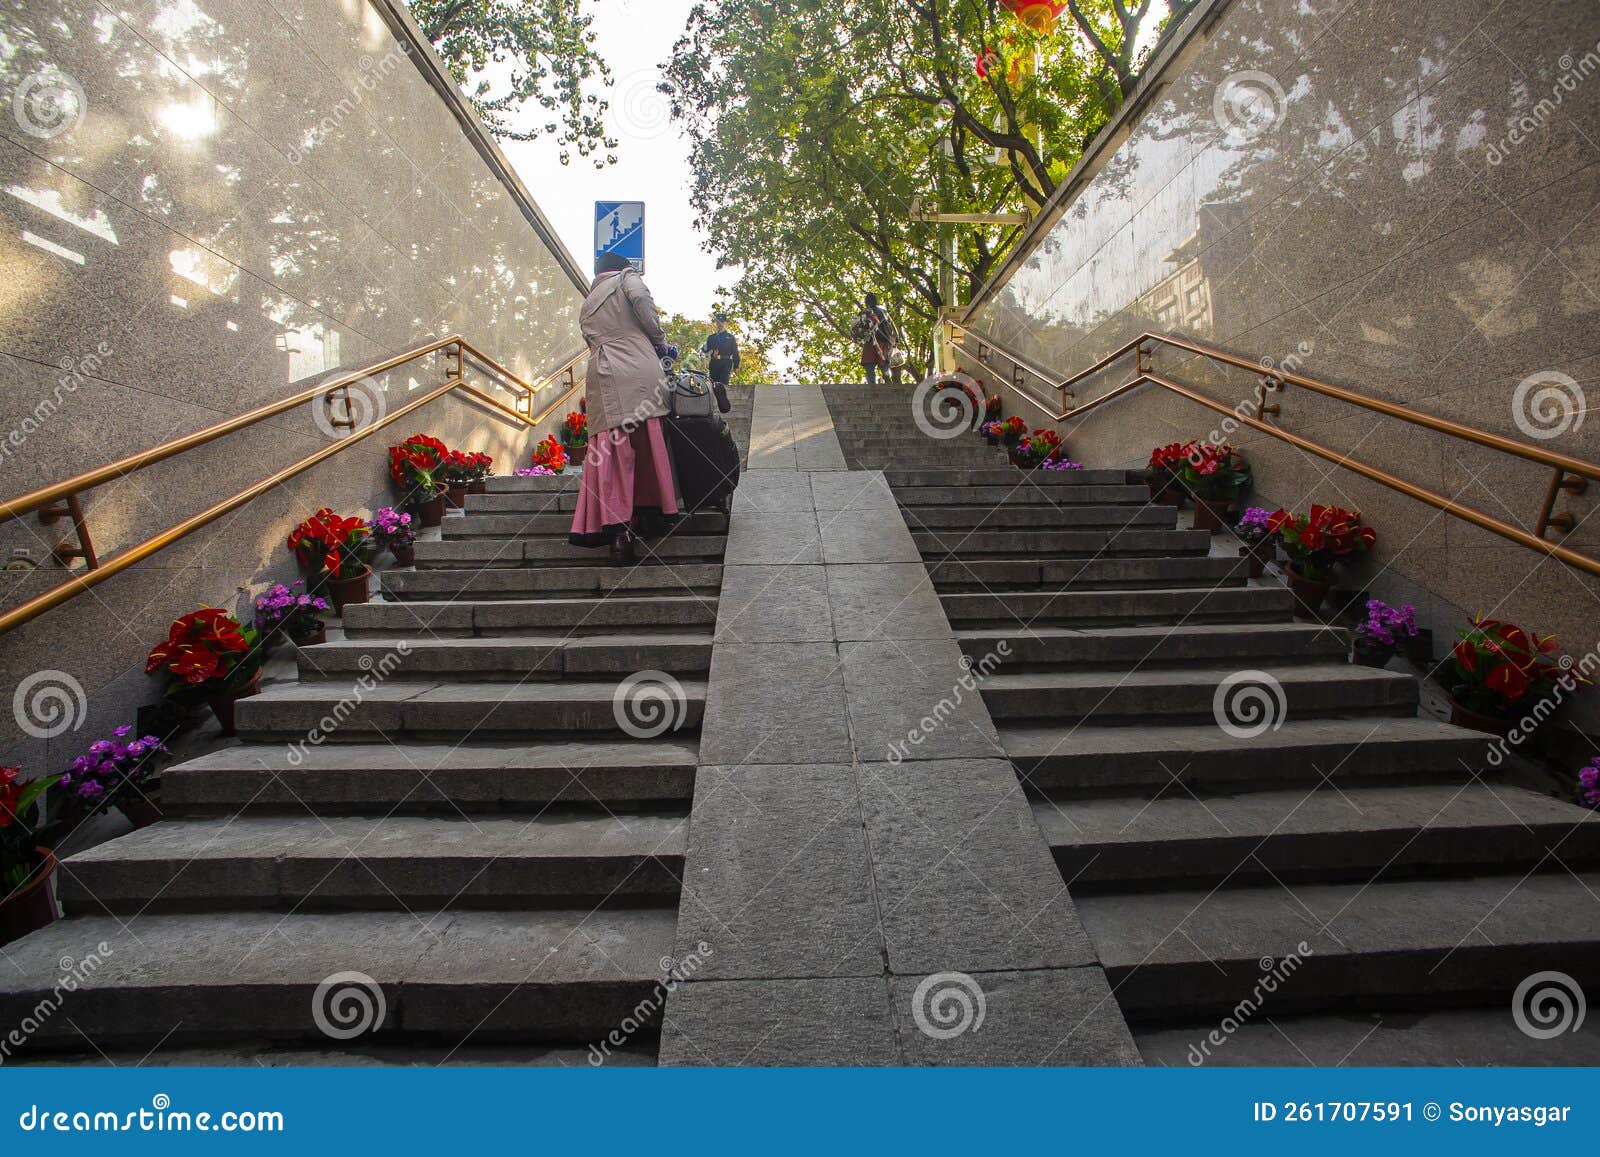 The Stairs Down Lead To The Tunnel Where People Cross The Street In ...